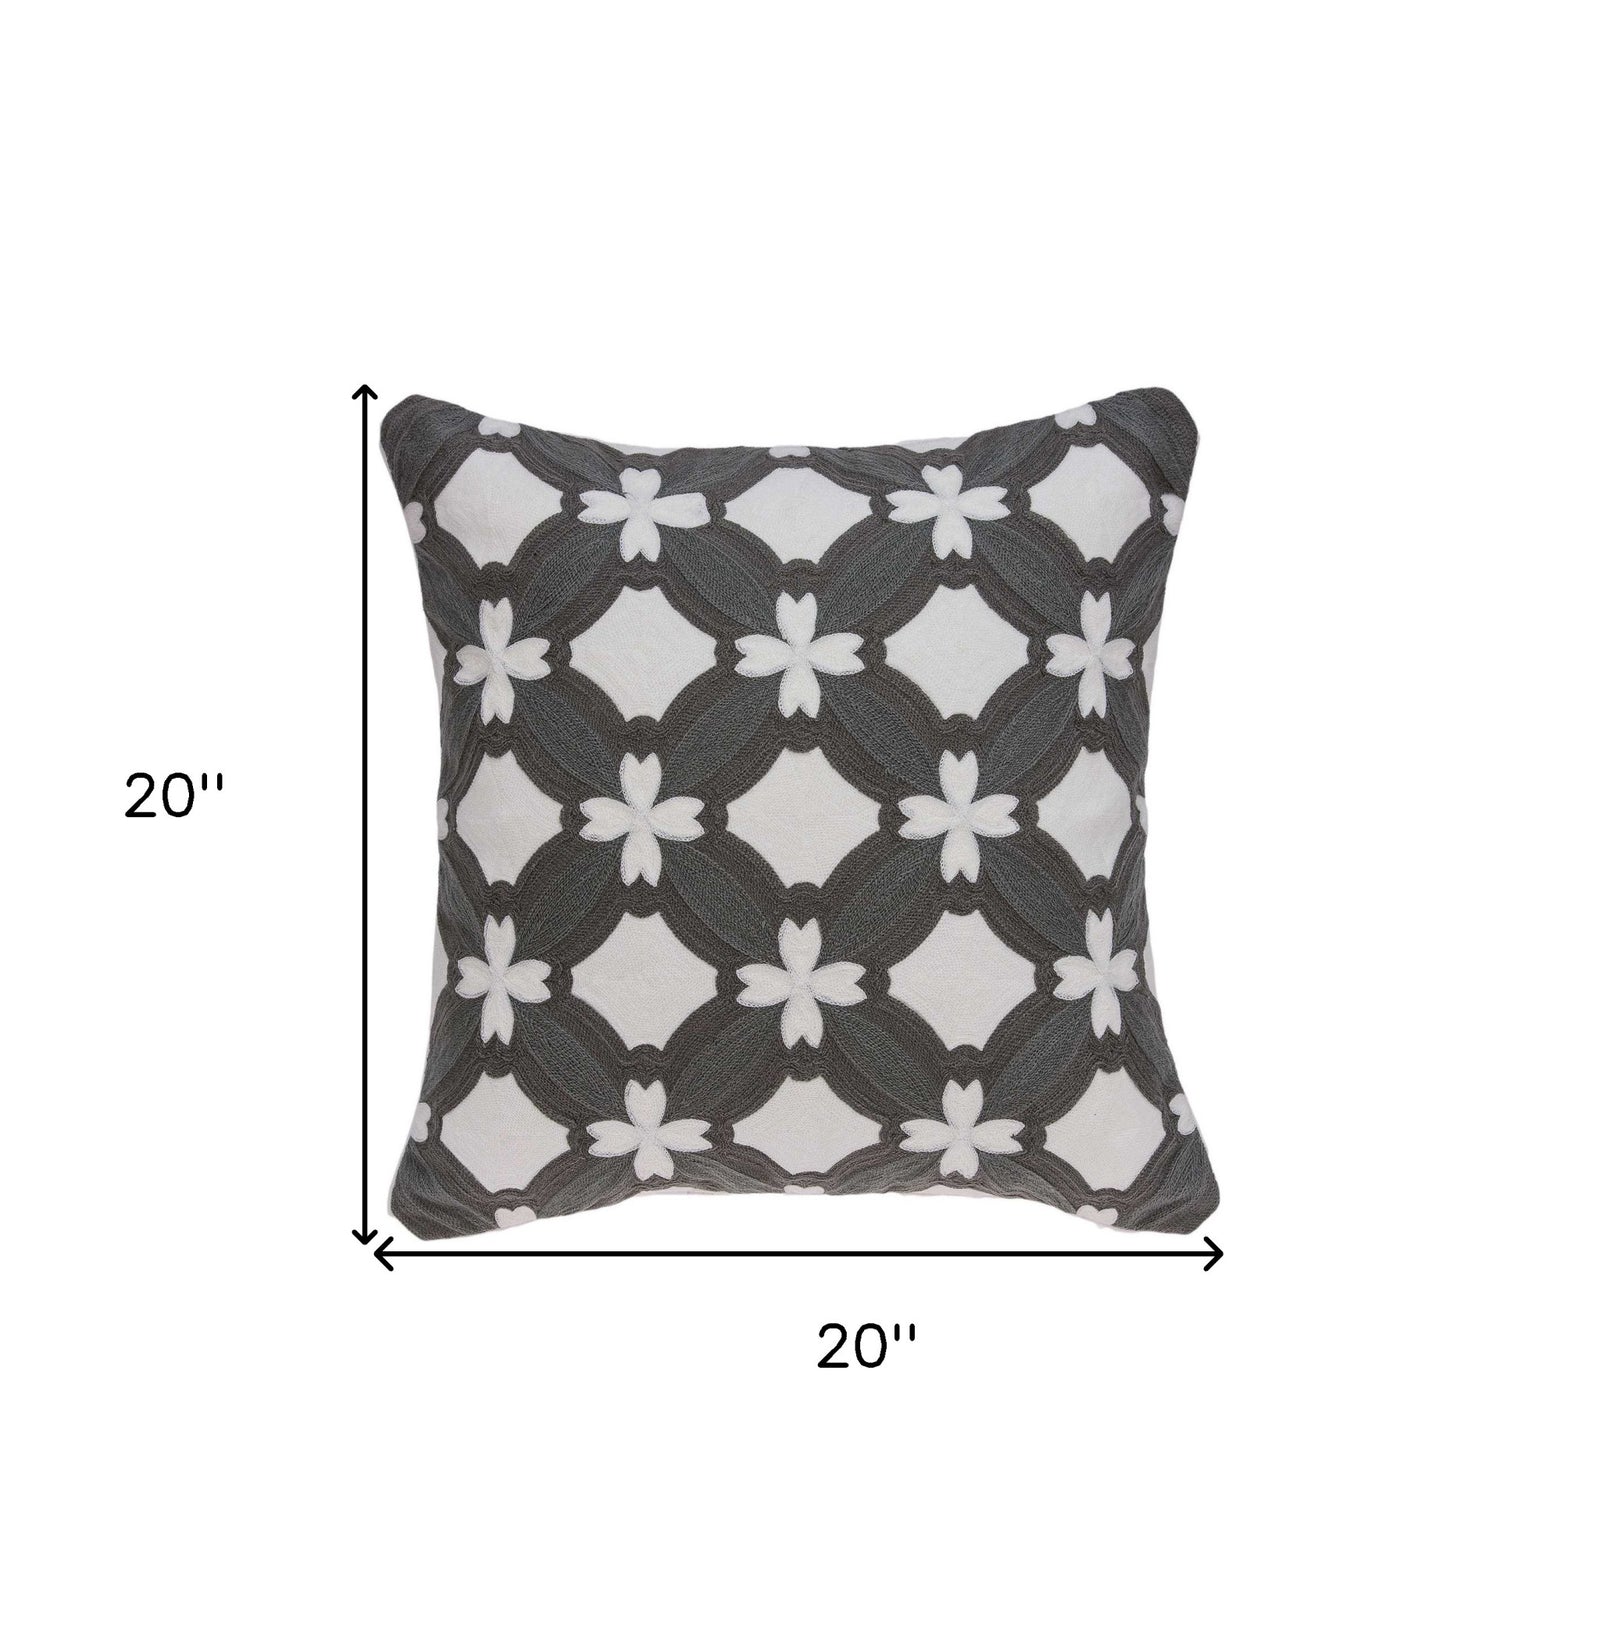 20" X 7" X 20" Transitional Gray And White Pillow Cover With Poly Insert